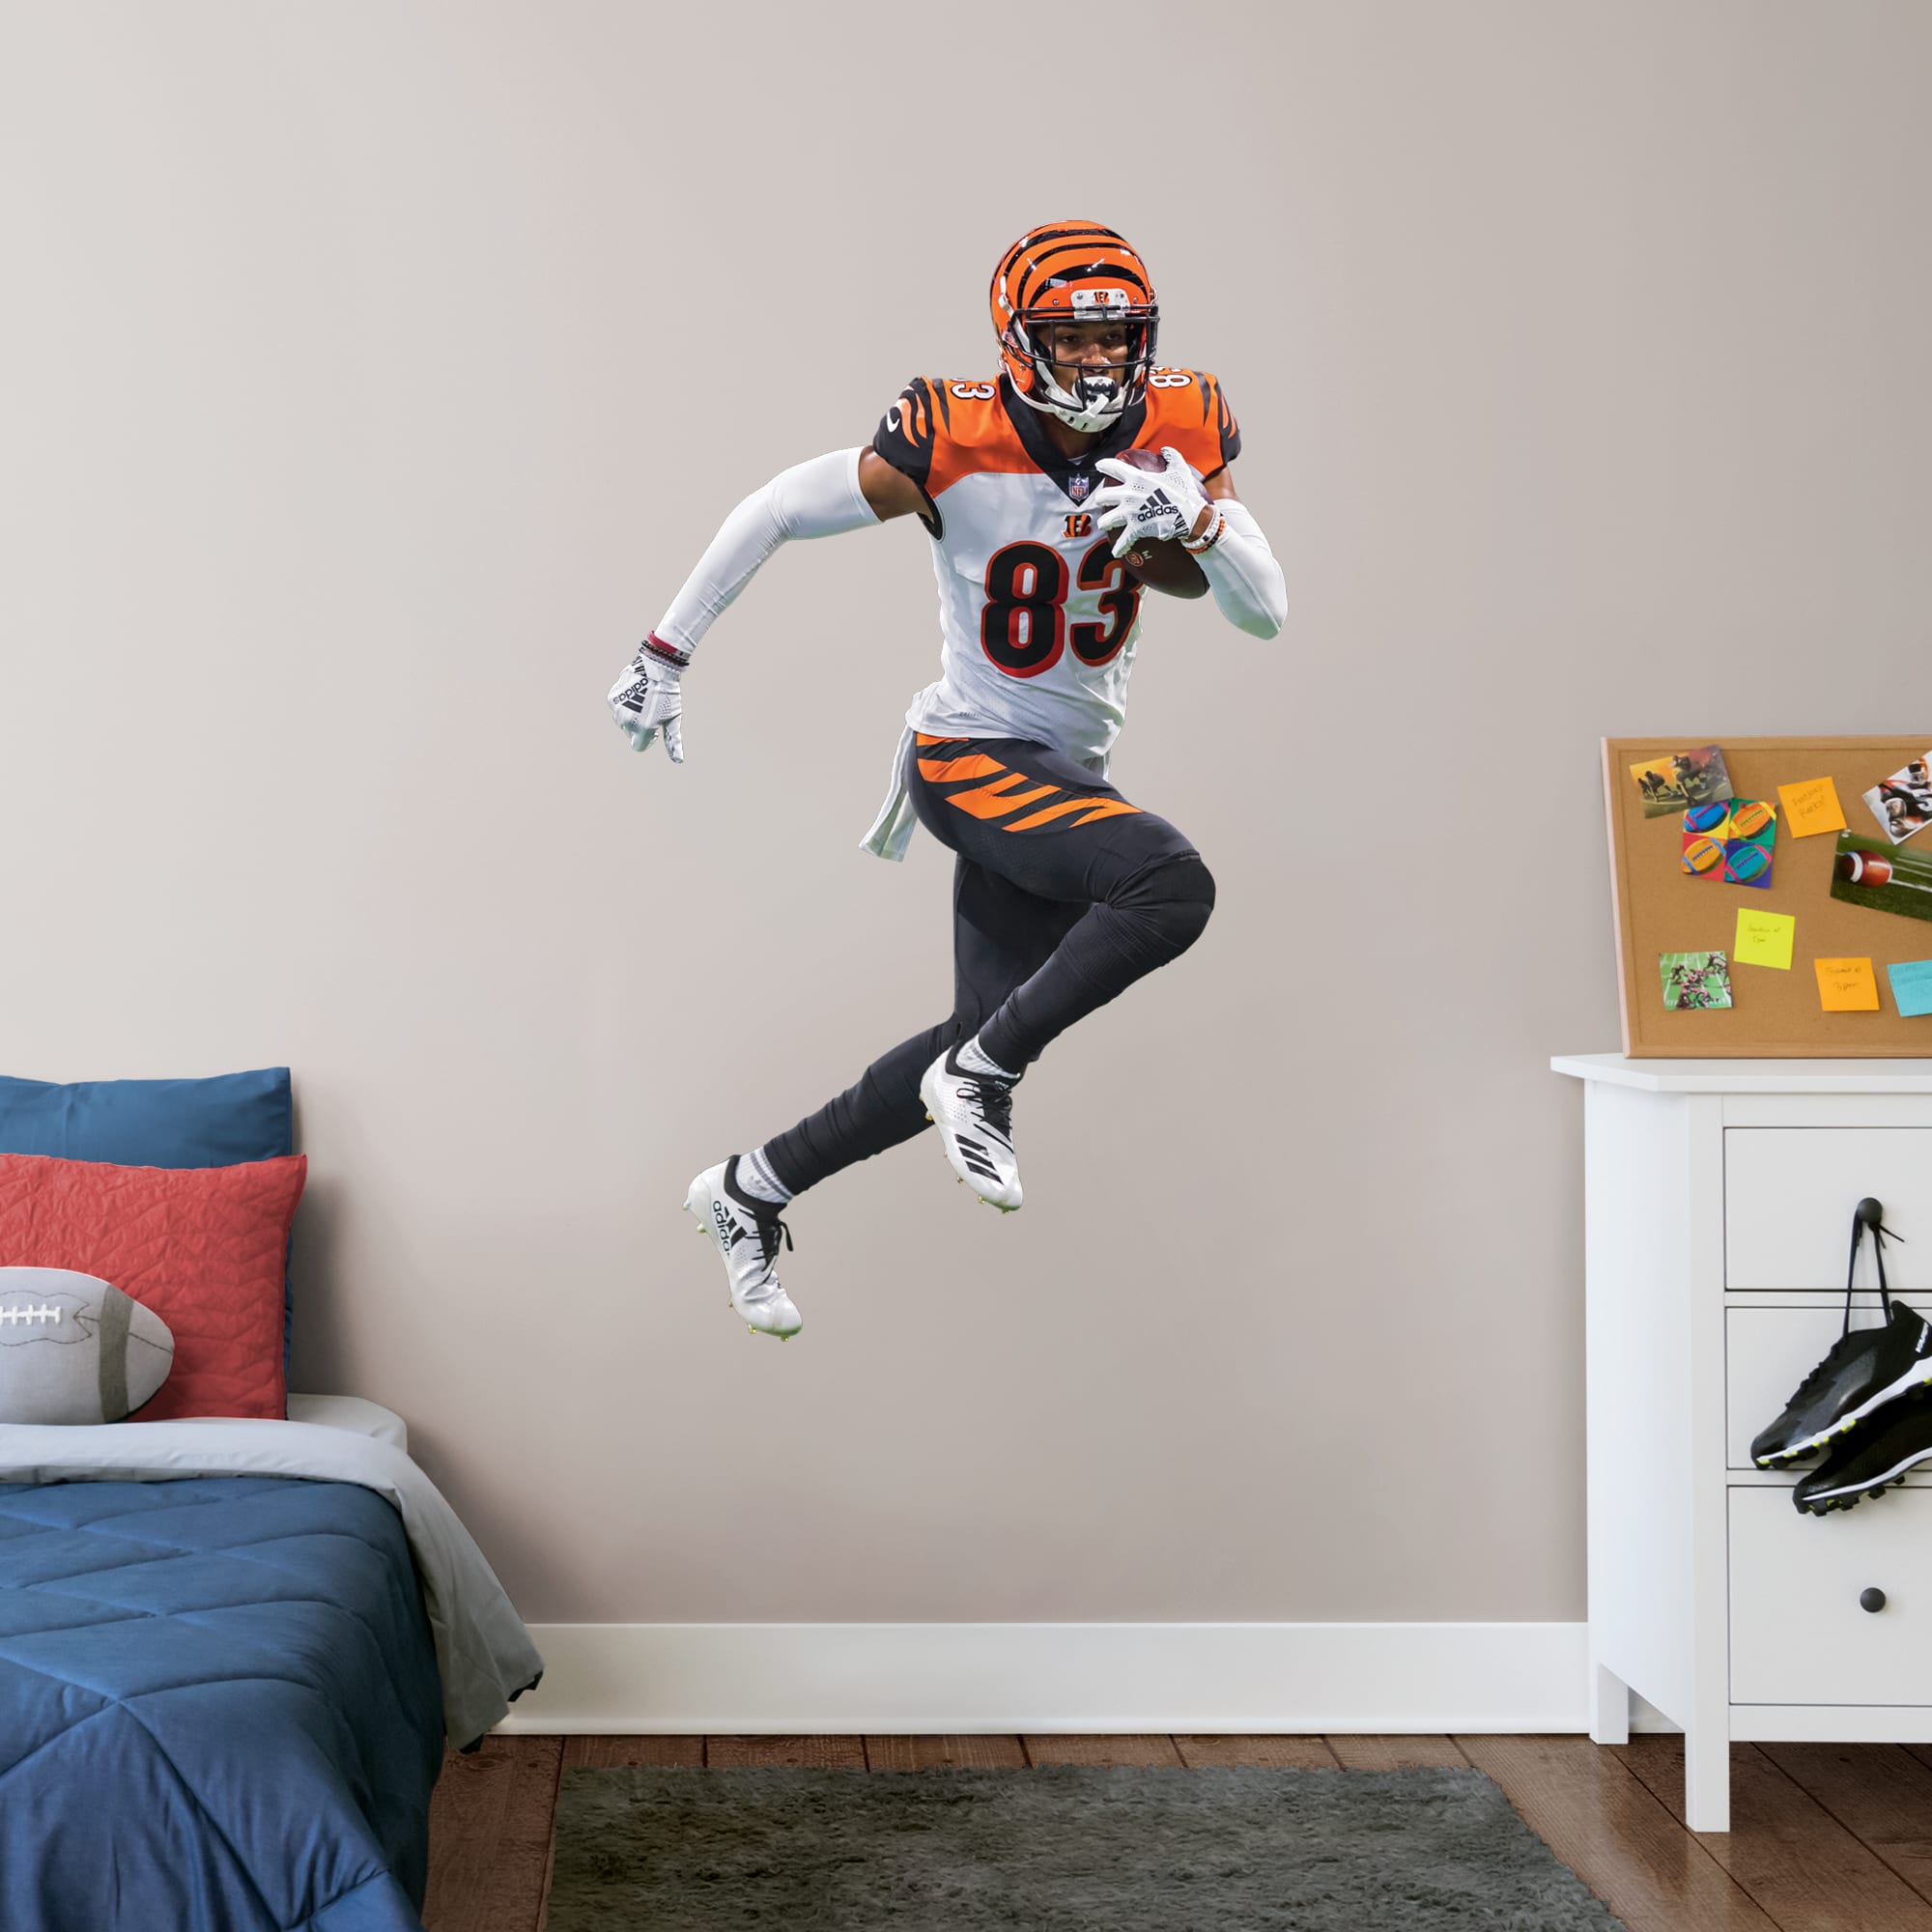 Tyler Boyd for Cincinnati Bengals - Officially Licensed NFL Removable Wall Decal Giant Athlete + 2 Decals (31"W x 51"H) by Fathe